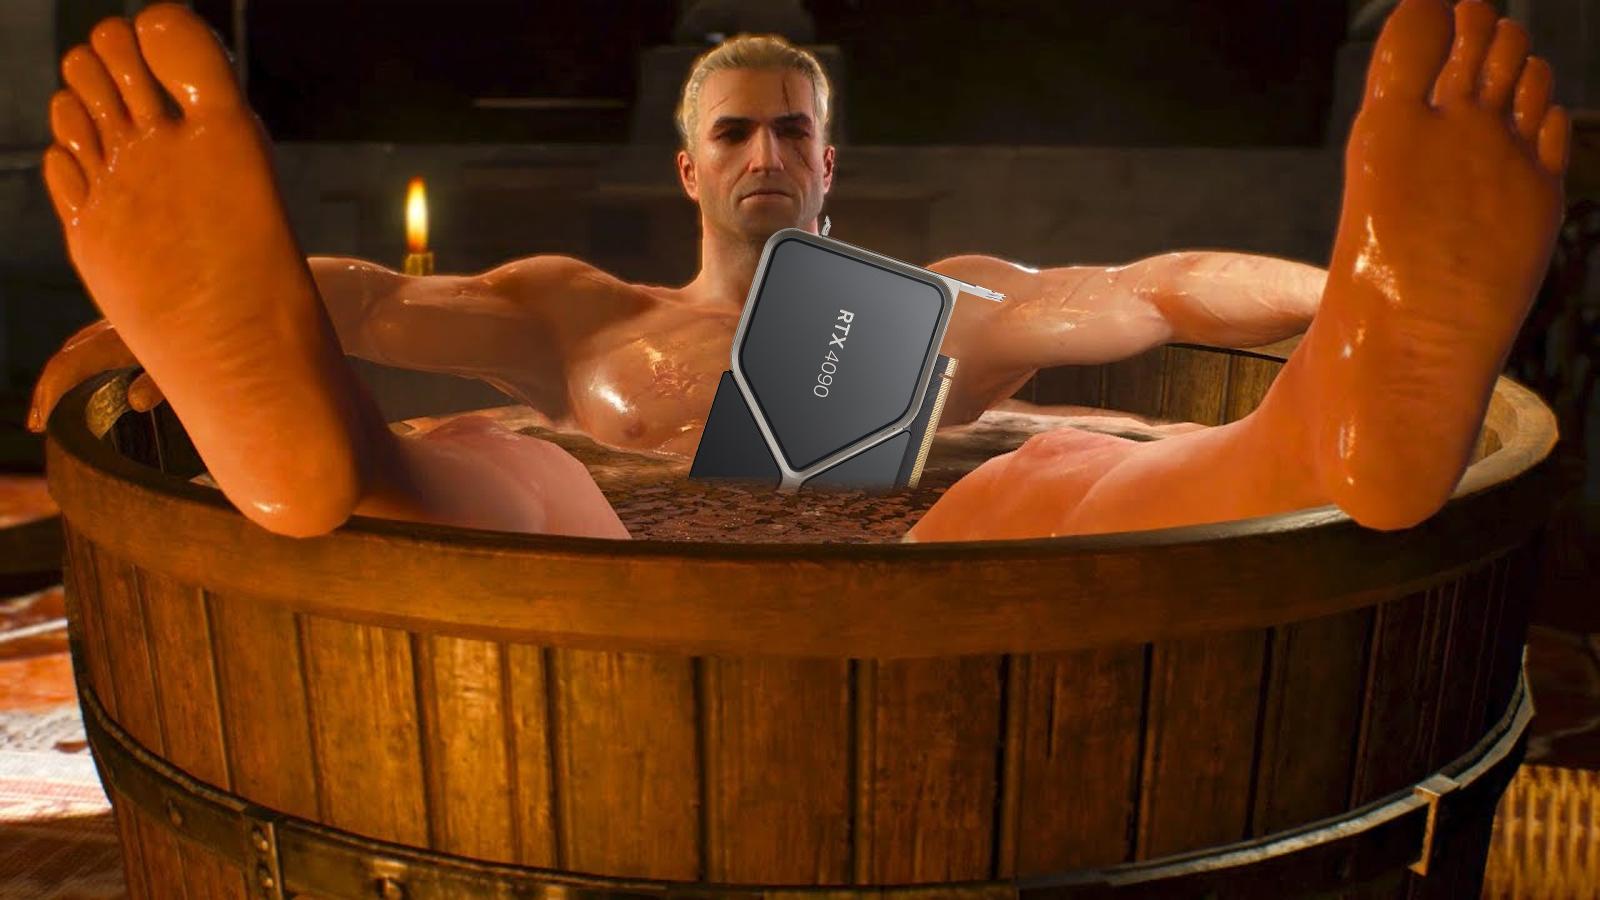 Geralt in a tub with an RTX card floating in the water